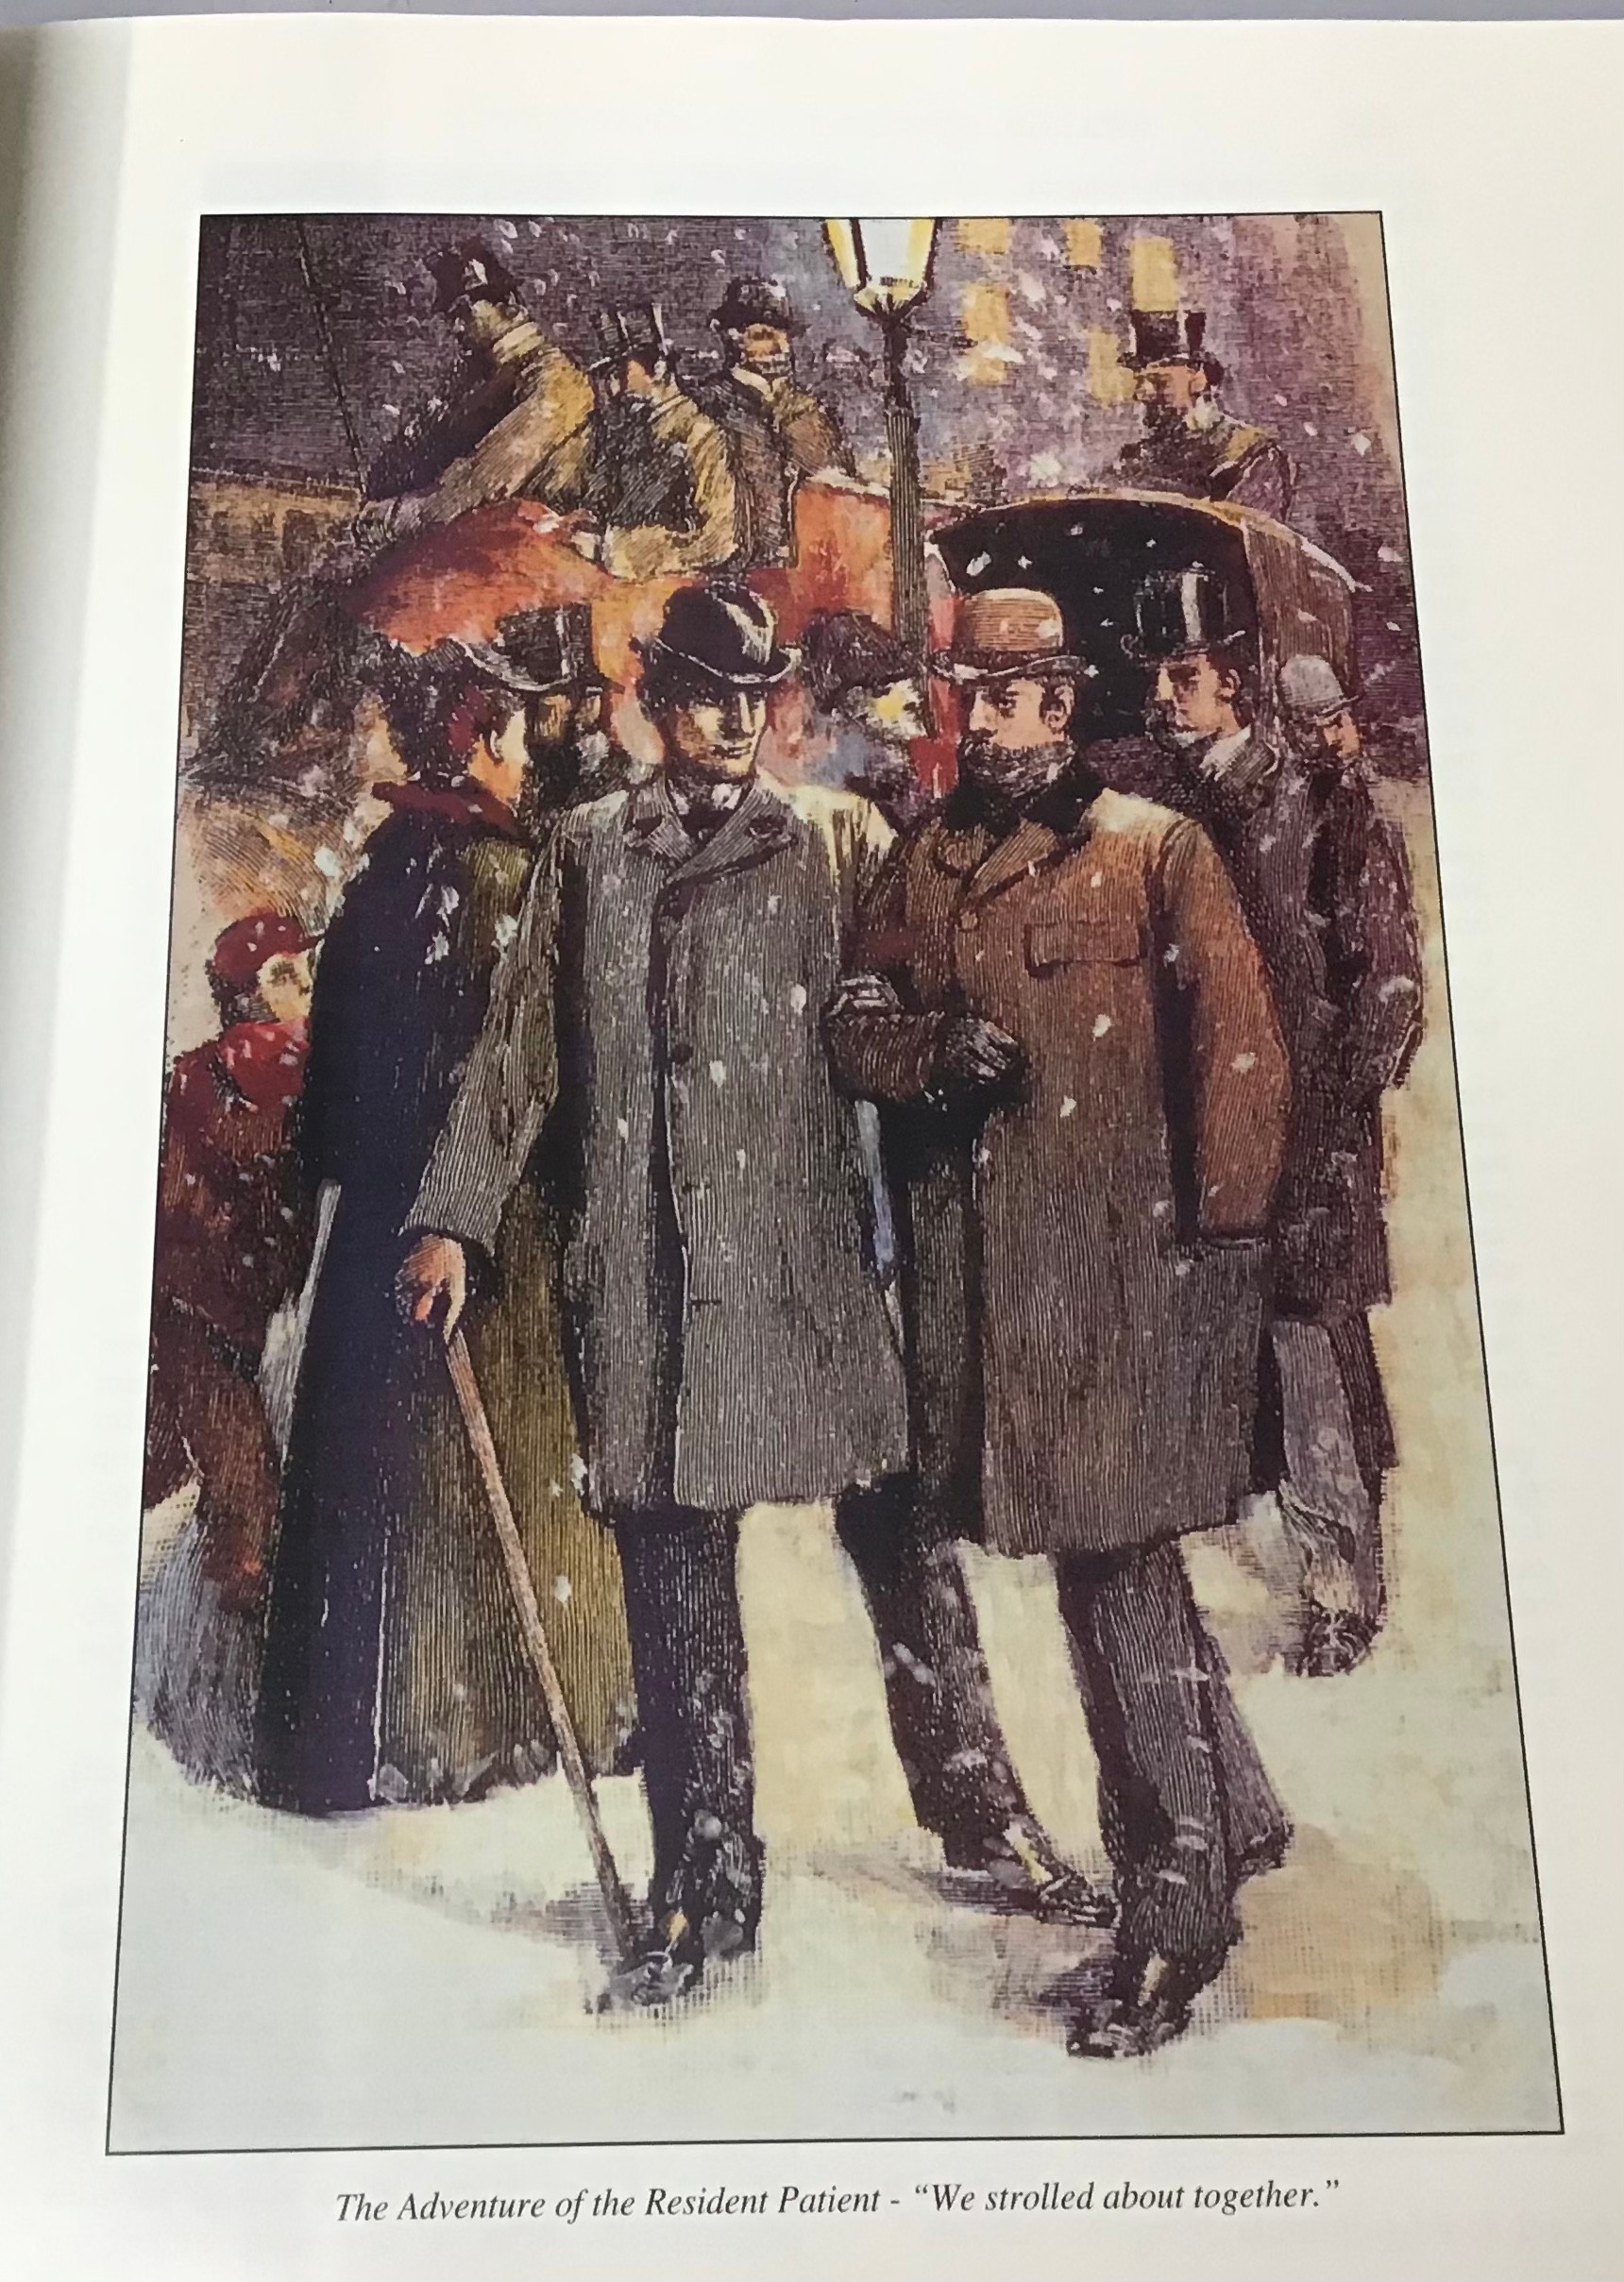 Sir Arthur Conan Doyle Illustrated Sherlock Holmes book. Limited edition of 4613/10.000. - Image 3 of 4